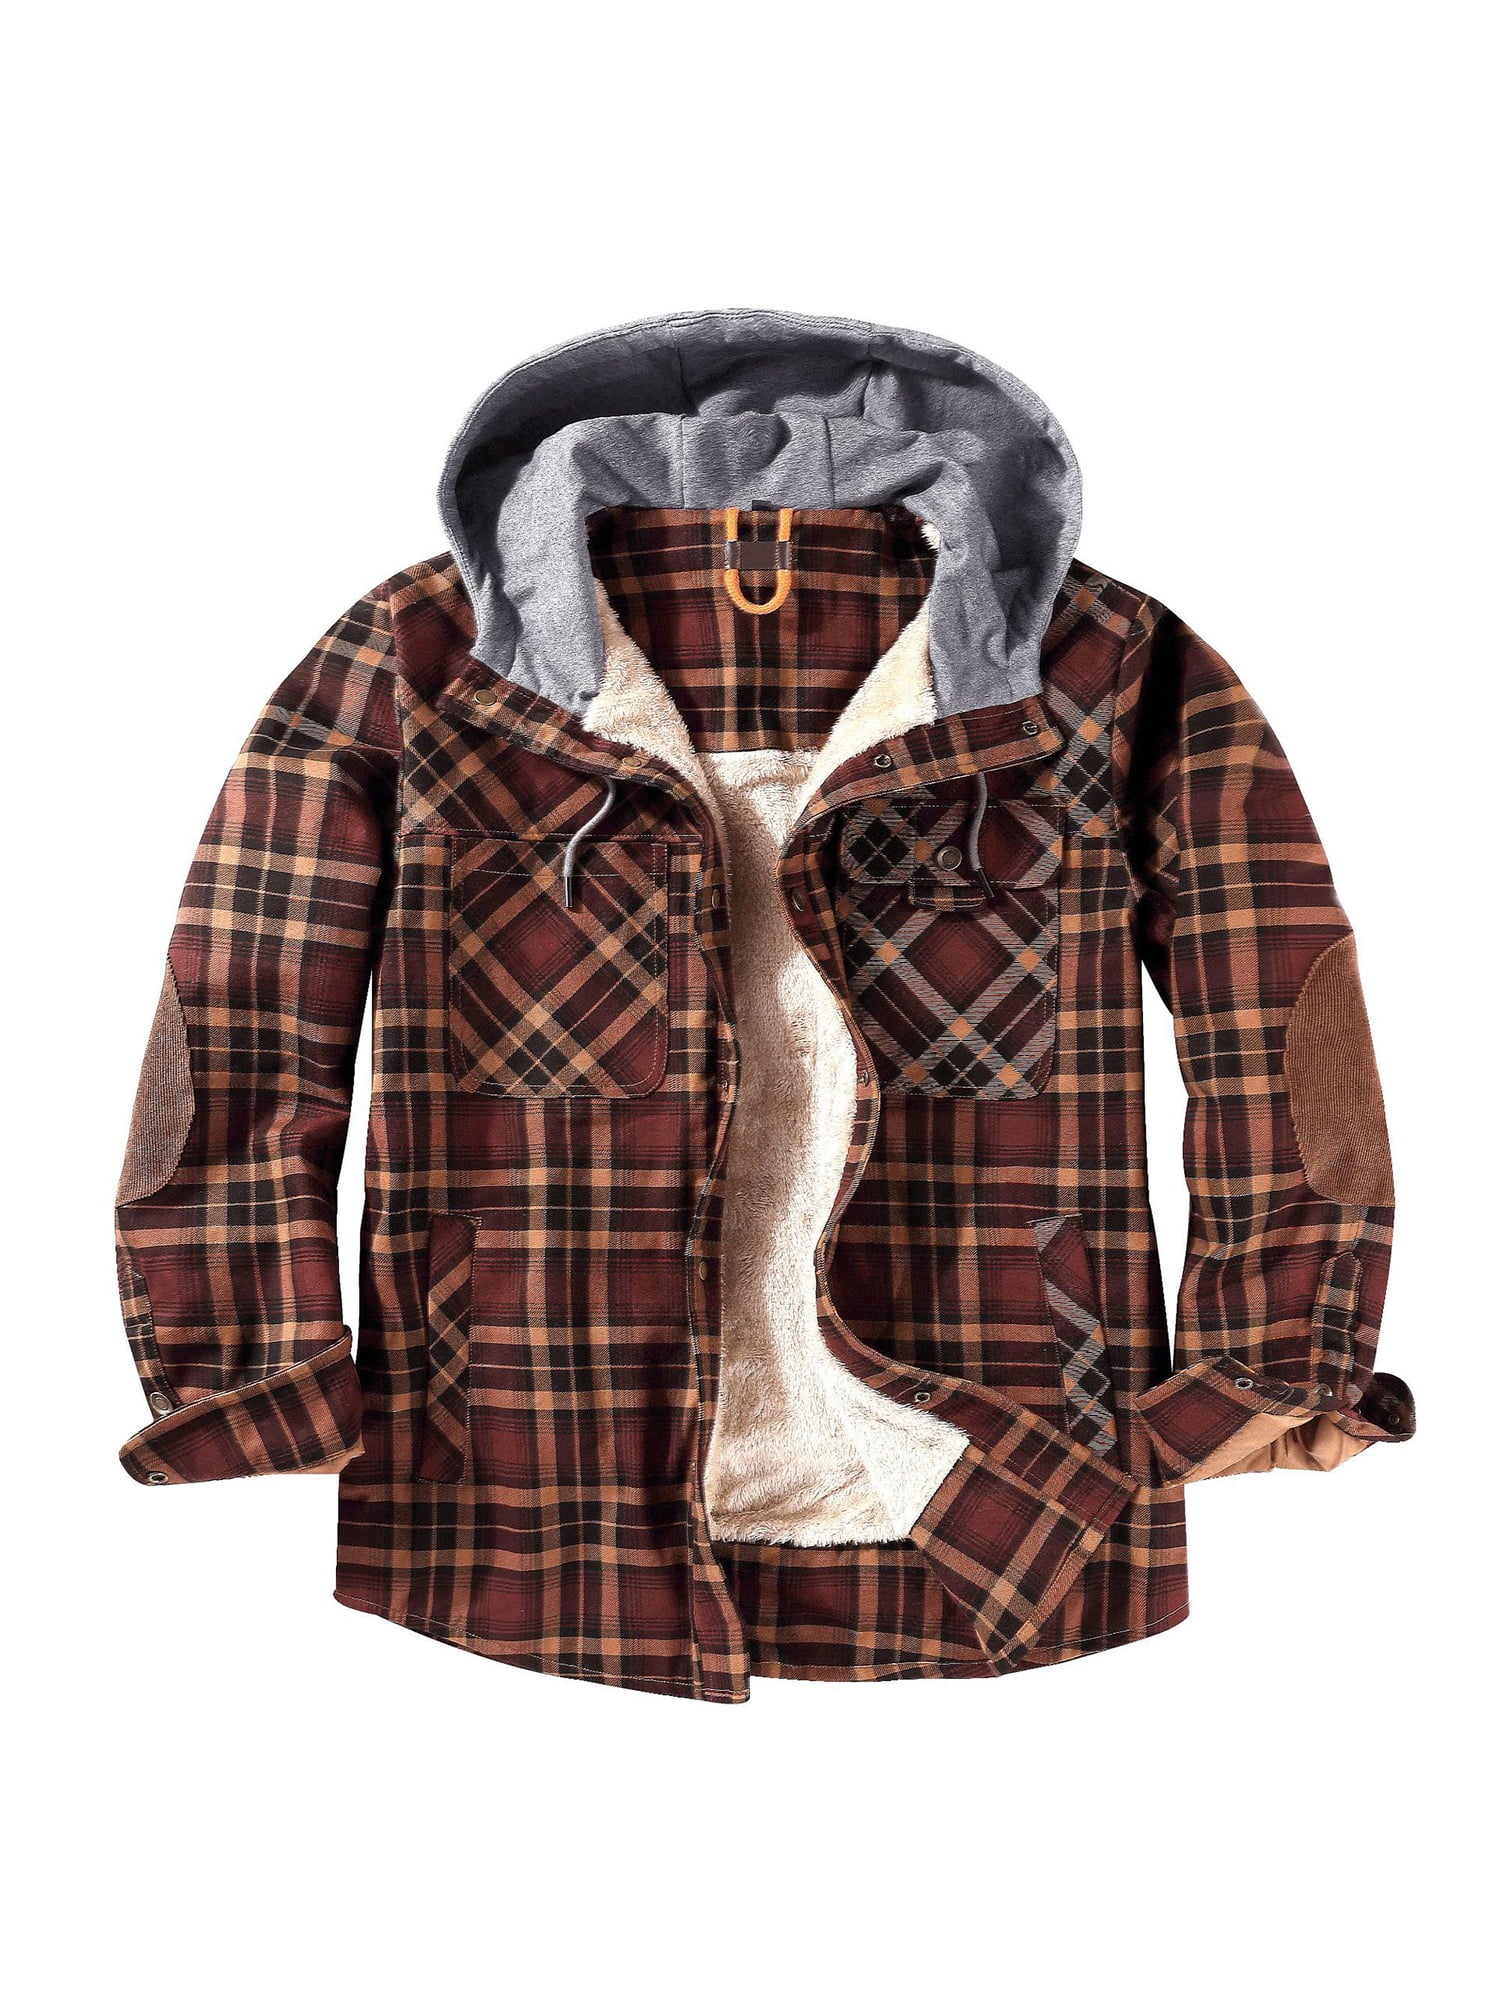 Mens Plaid Hooded Shirts Casual Long Sleeve Lightweight Shirt Jackets Button Up Relaxed Fit Hooded Quilted Shirt Jacket